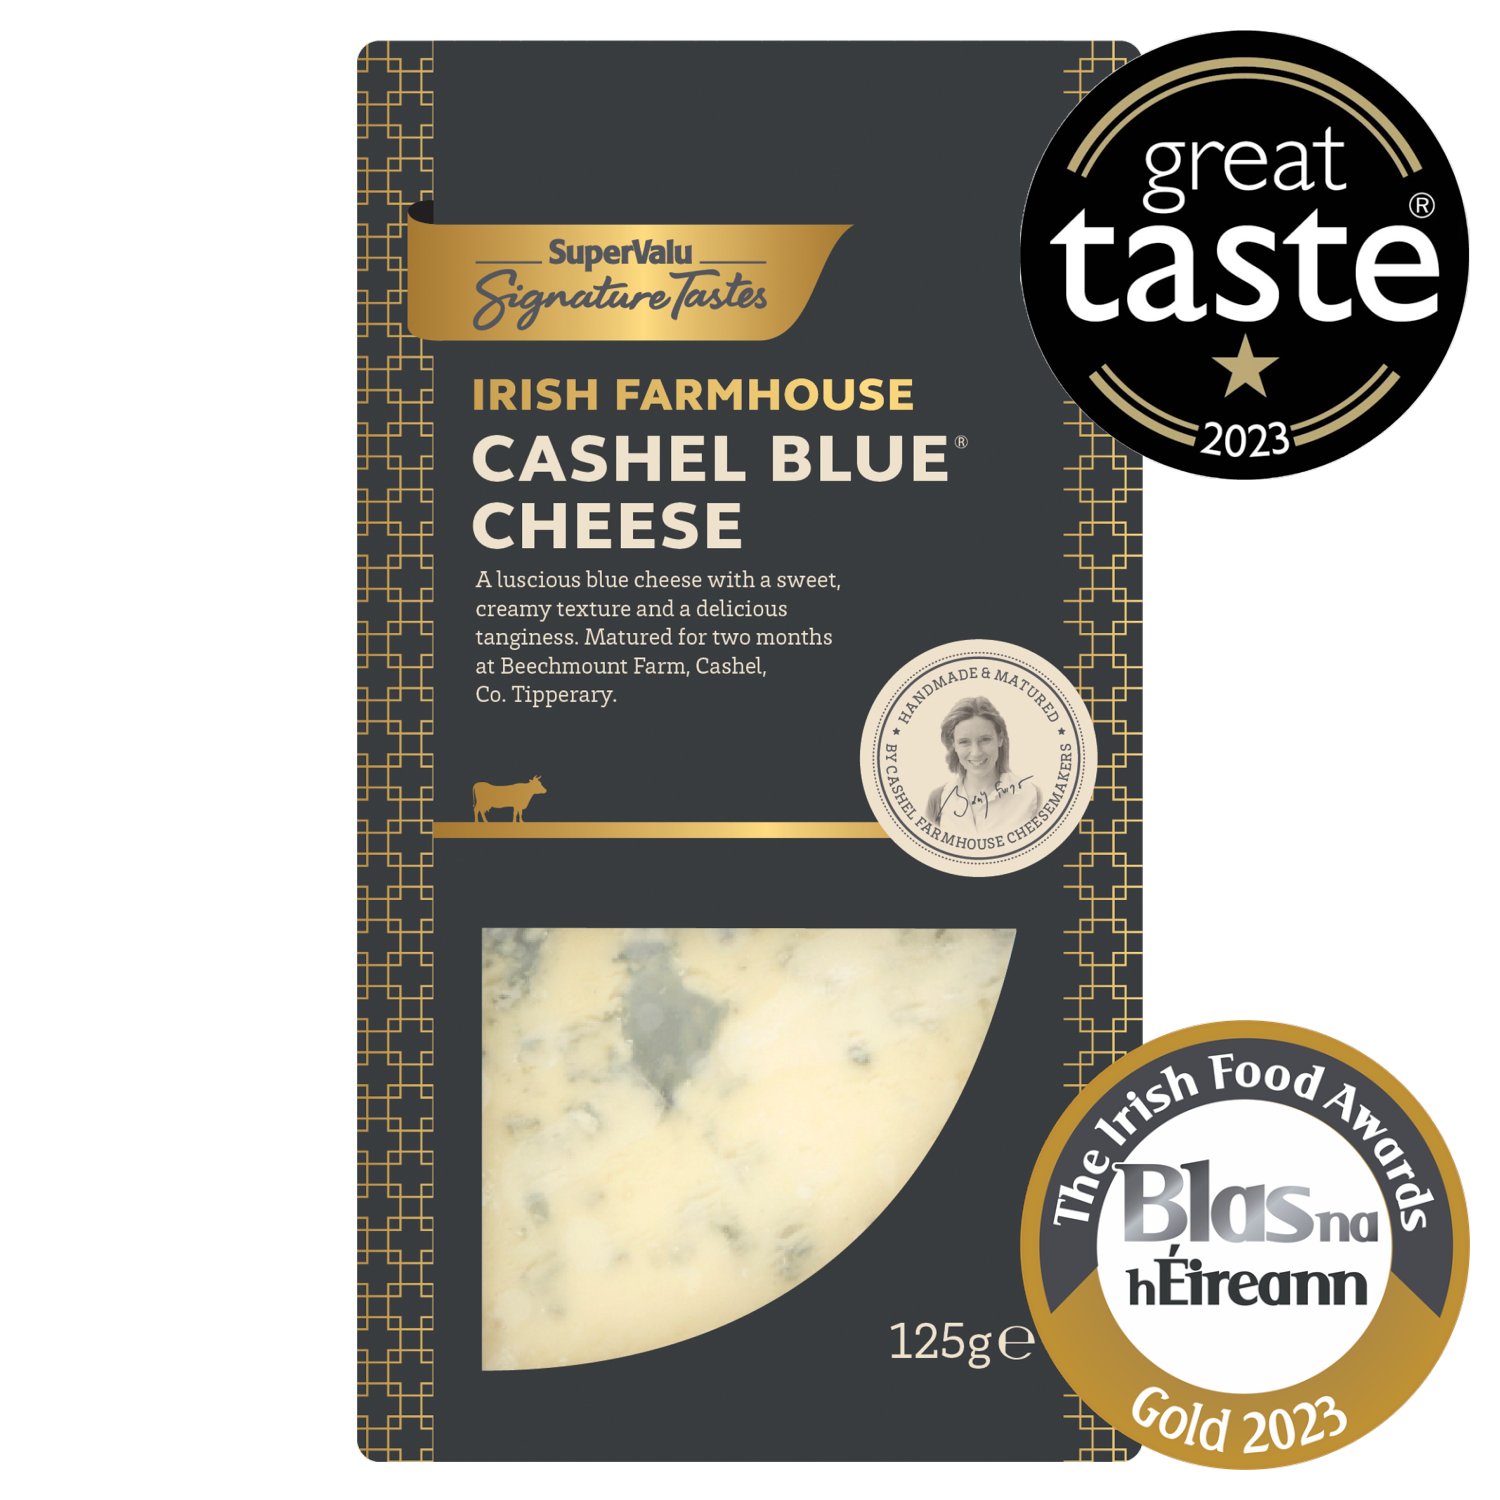 A luscious blue cheese with a sweet, creamy texture and a delicious tanginess. Matured for two months at Beechmount Farm, Cashel, Co. Tipperary.